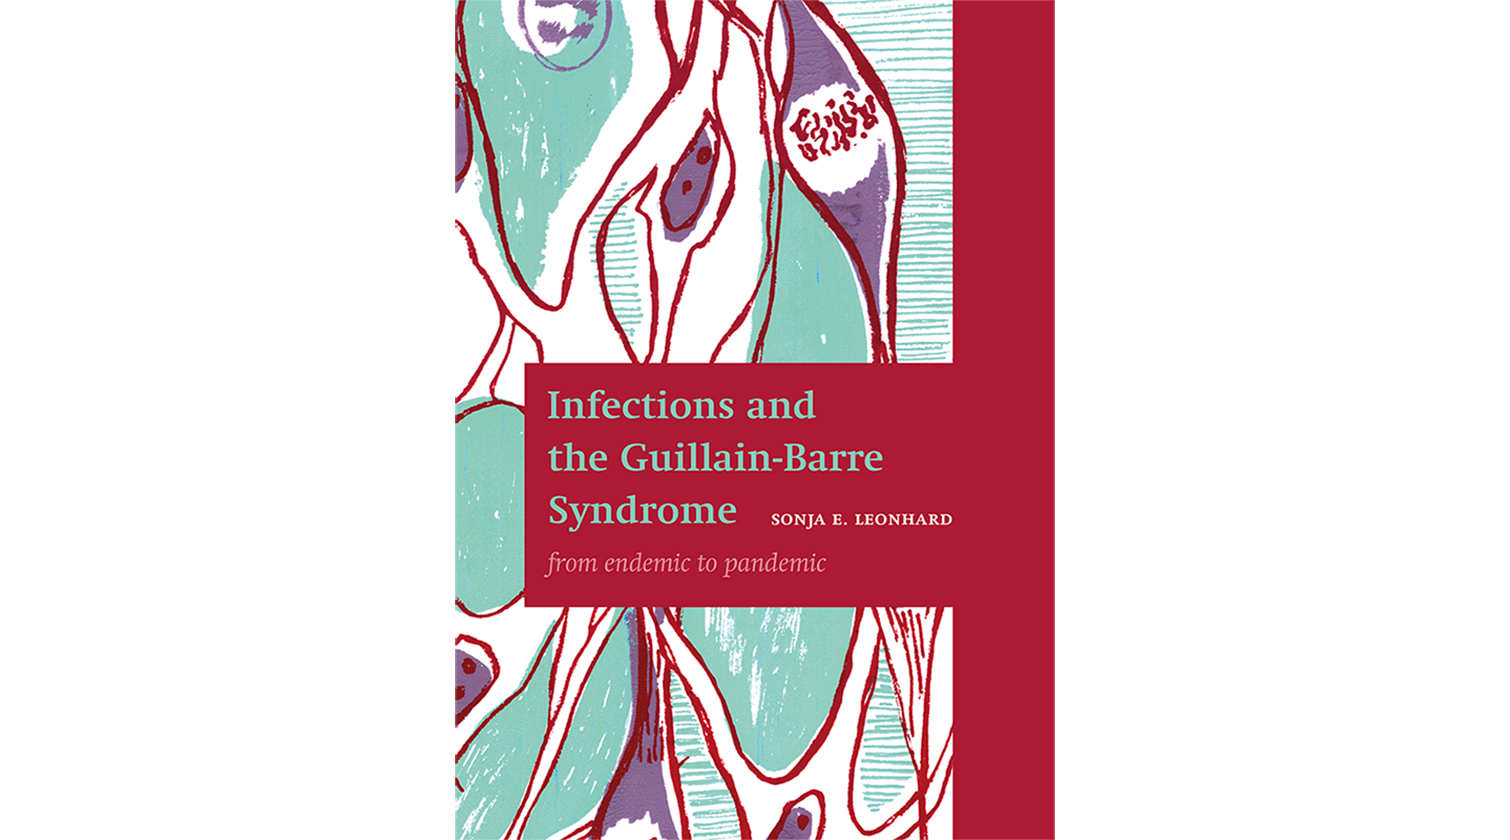 Coverfoto (kleur) proefschrift Infections and the Guillain-Barre Syndrome